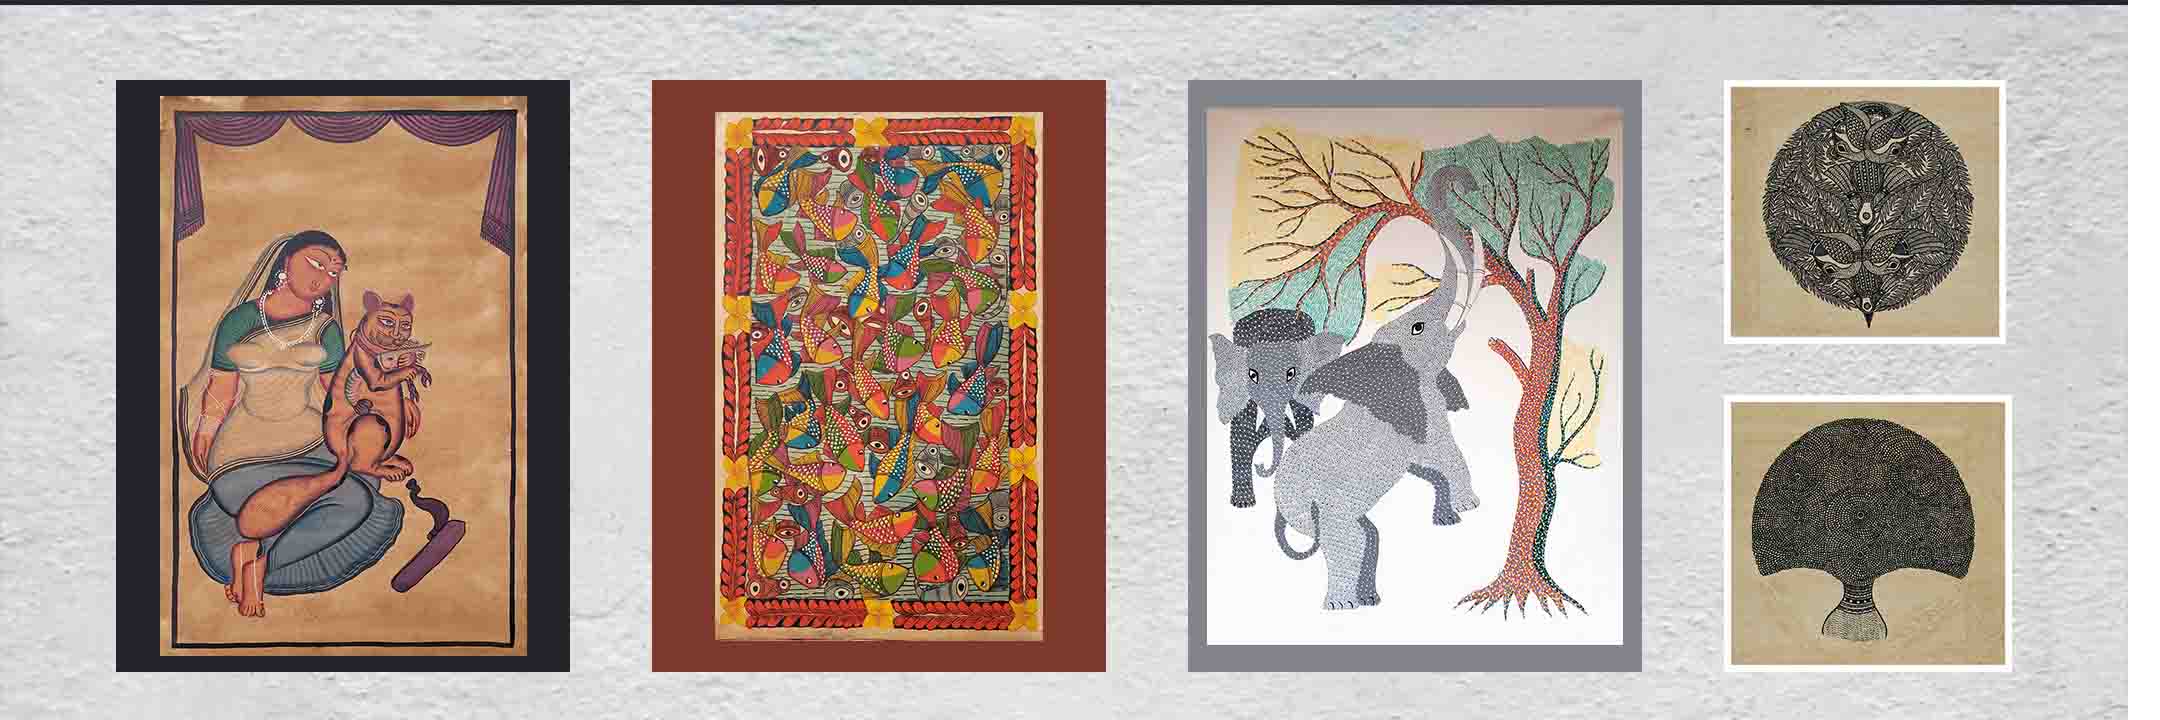 Hand Made Paintings at Rs 1500, okhla industrial area, Phase 2, New Delhi